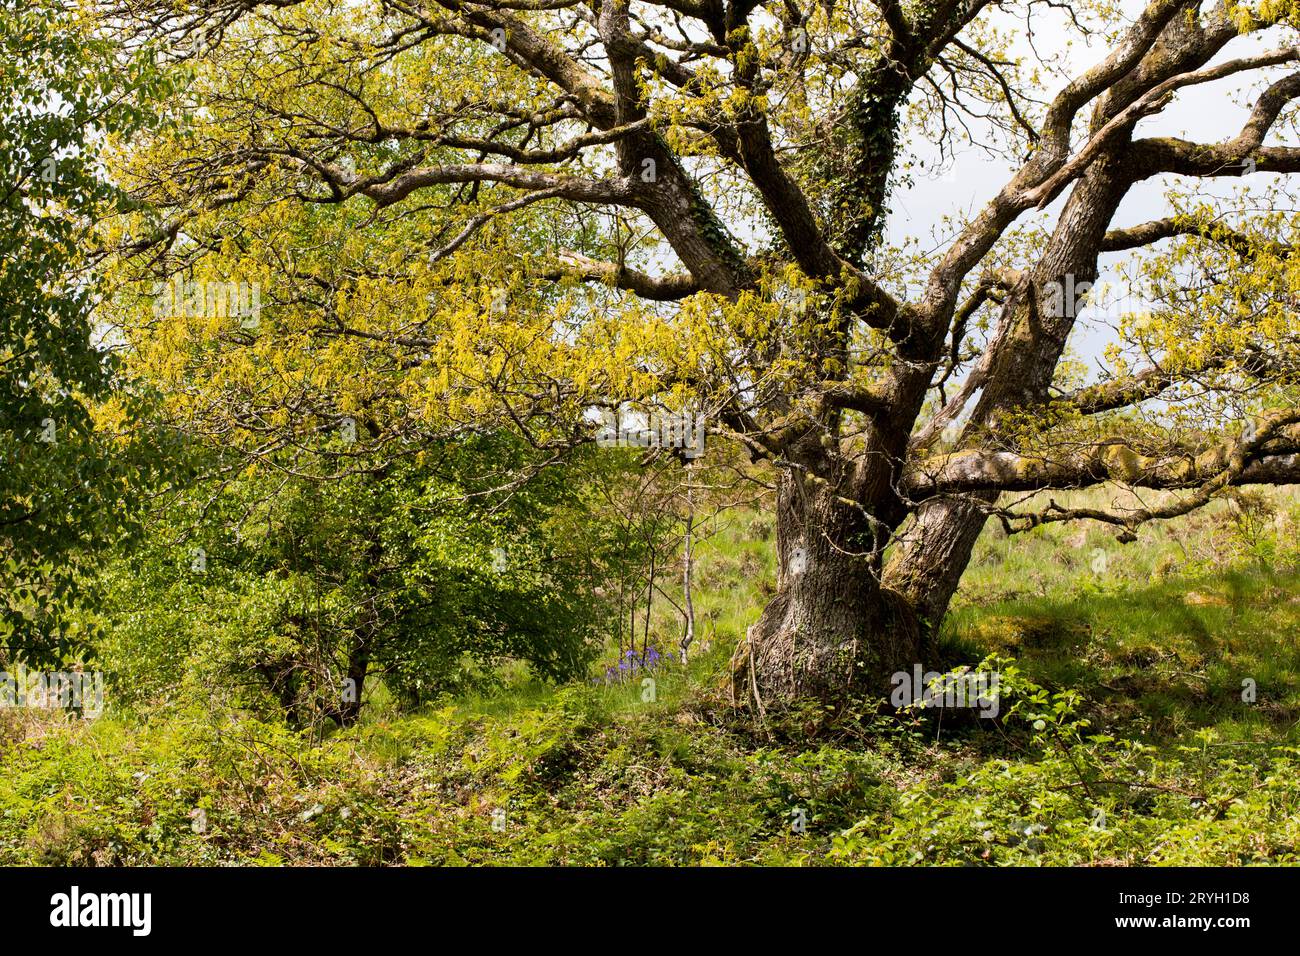 Sessile oak tree (Quercus petraea), old multi-stemmed tree growing on a hillside in spring. Powys, Wales. May. Stock Photo